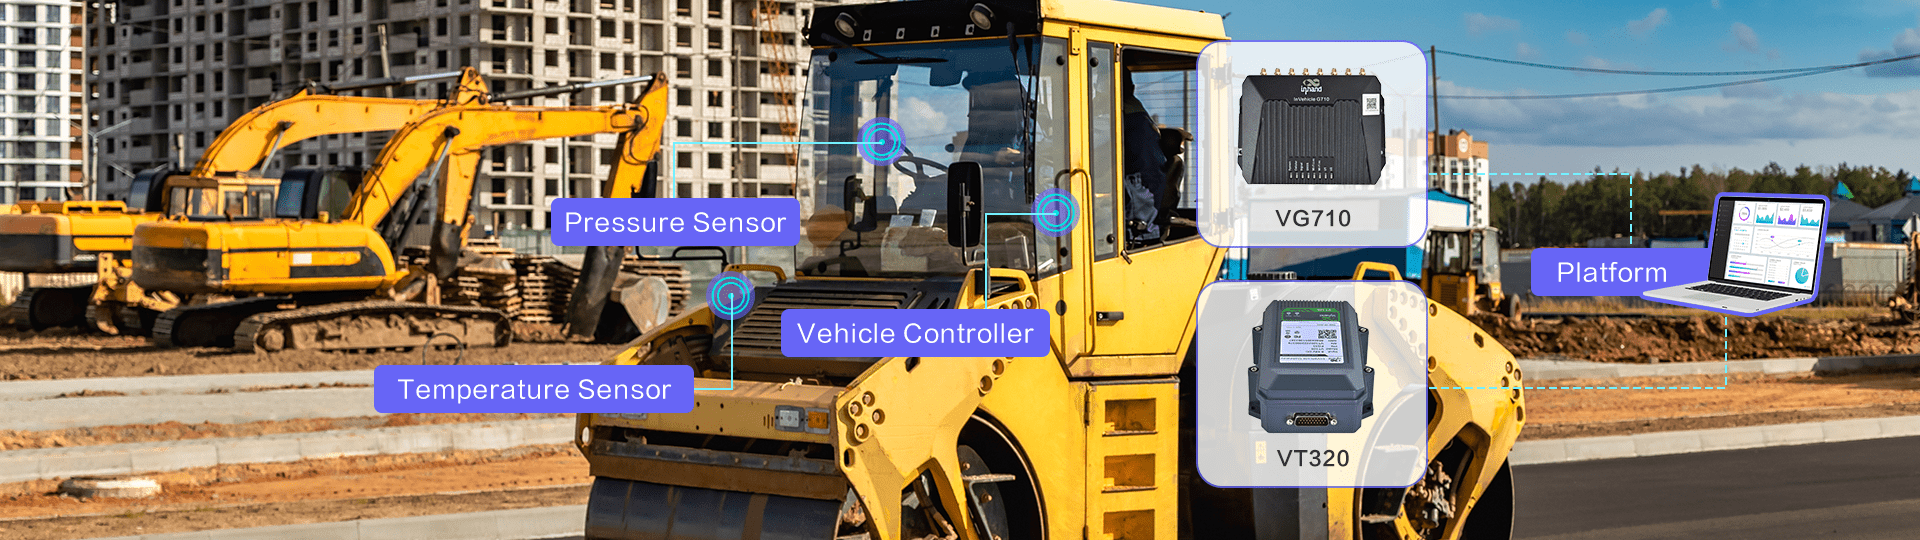 Telematics Solution for Engineering Vehicles